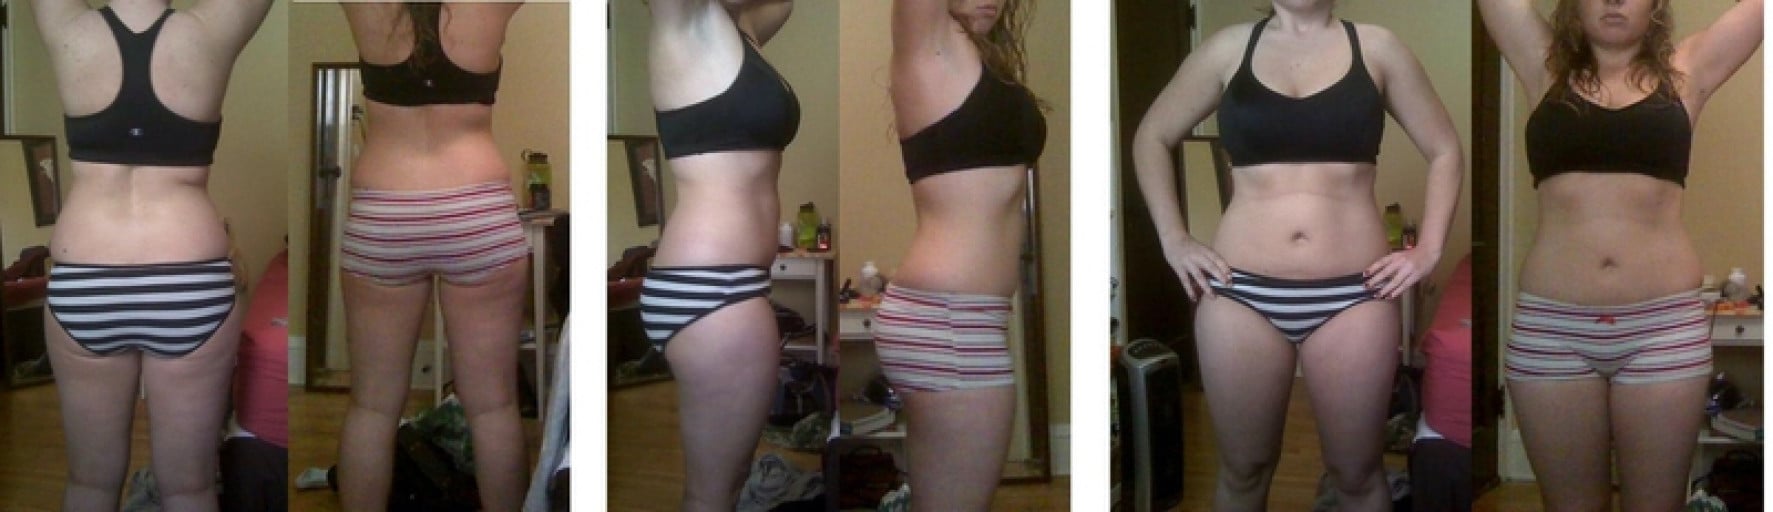 A progress pic of a 5'3" woman showing a snapshot of 150 pounds at a height of 5'3